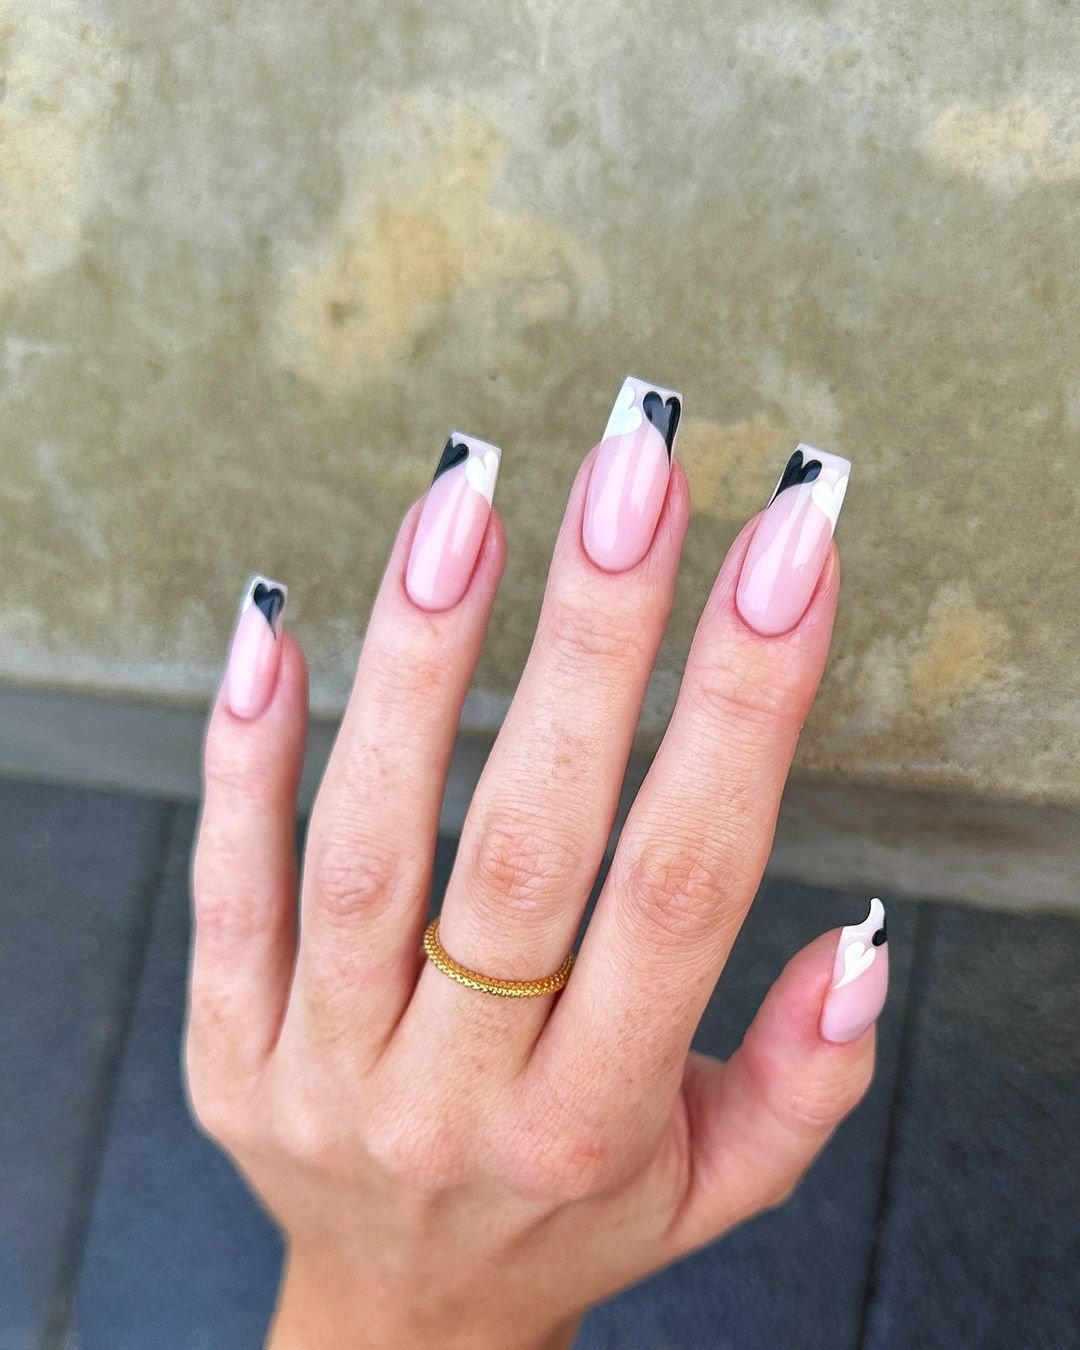 11 - Picture of Black and White Nails